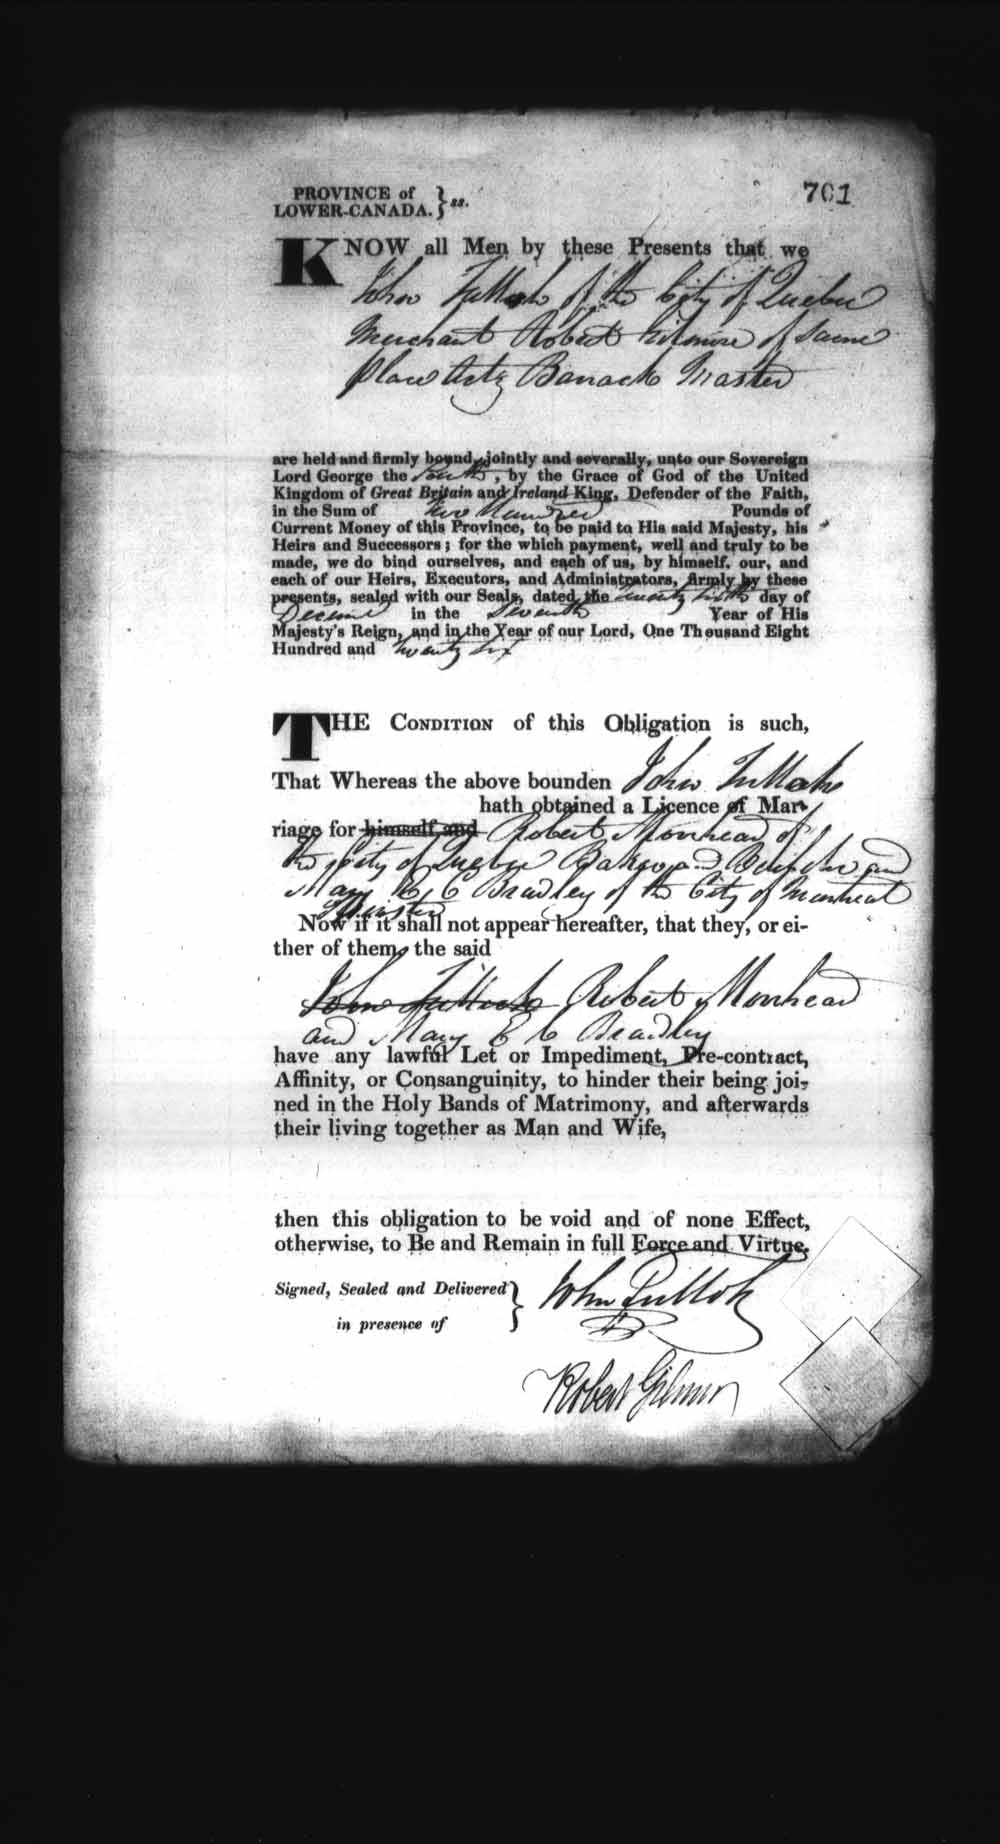 Digitized page of Upper and Lower Canada Marriage Bonds (1779-1865) for Image No.: e008236752